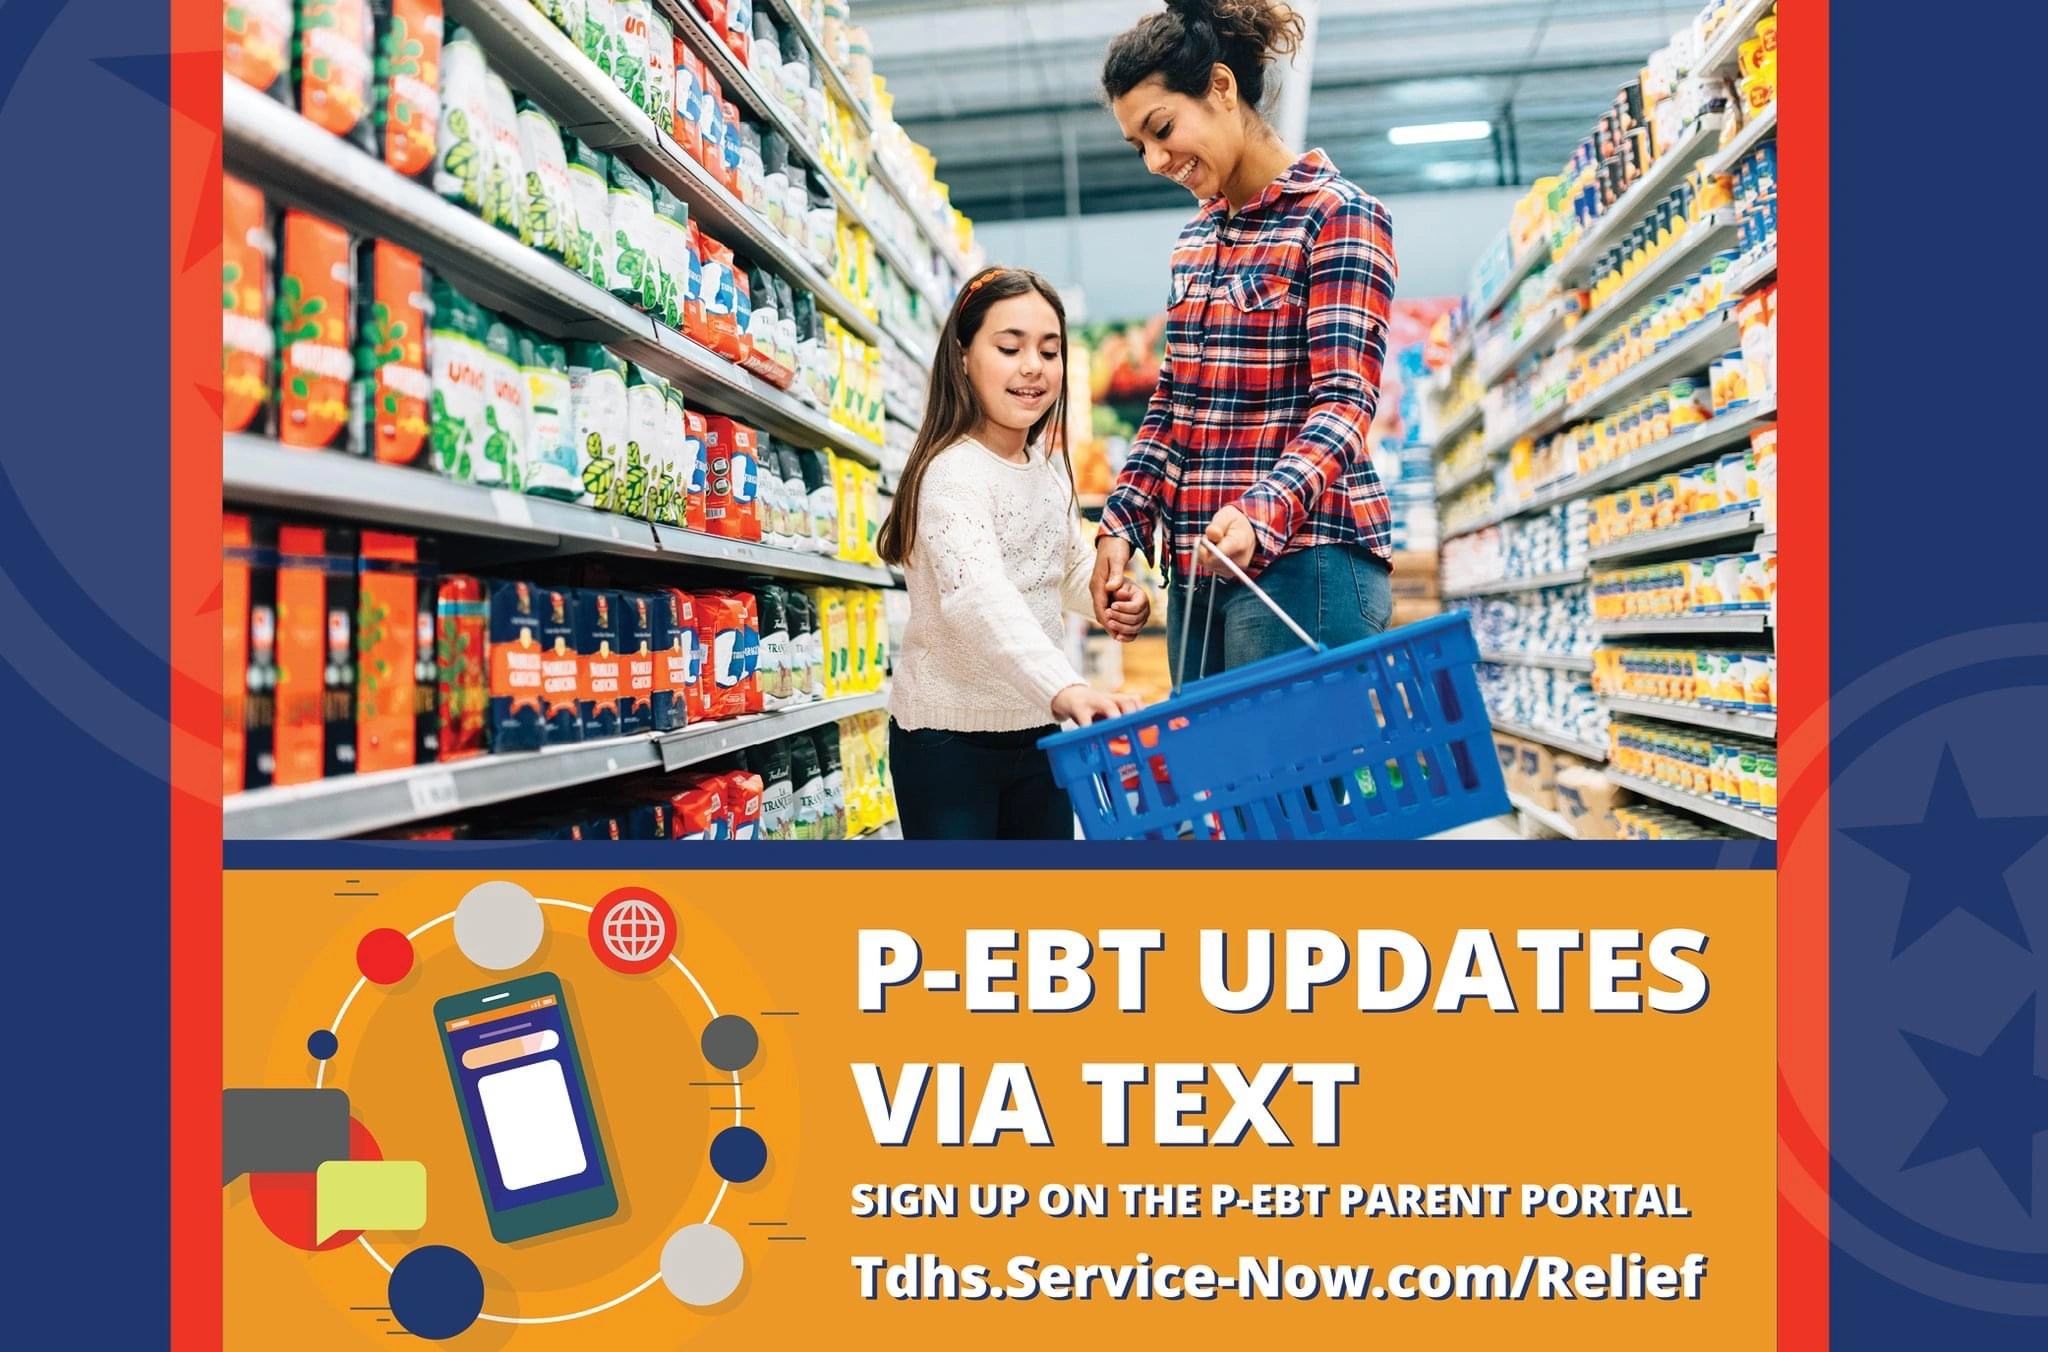 Sign Up to Receive PEBT Updates